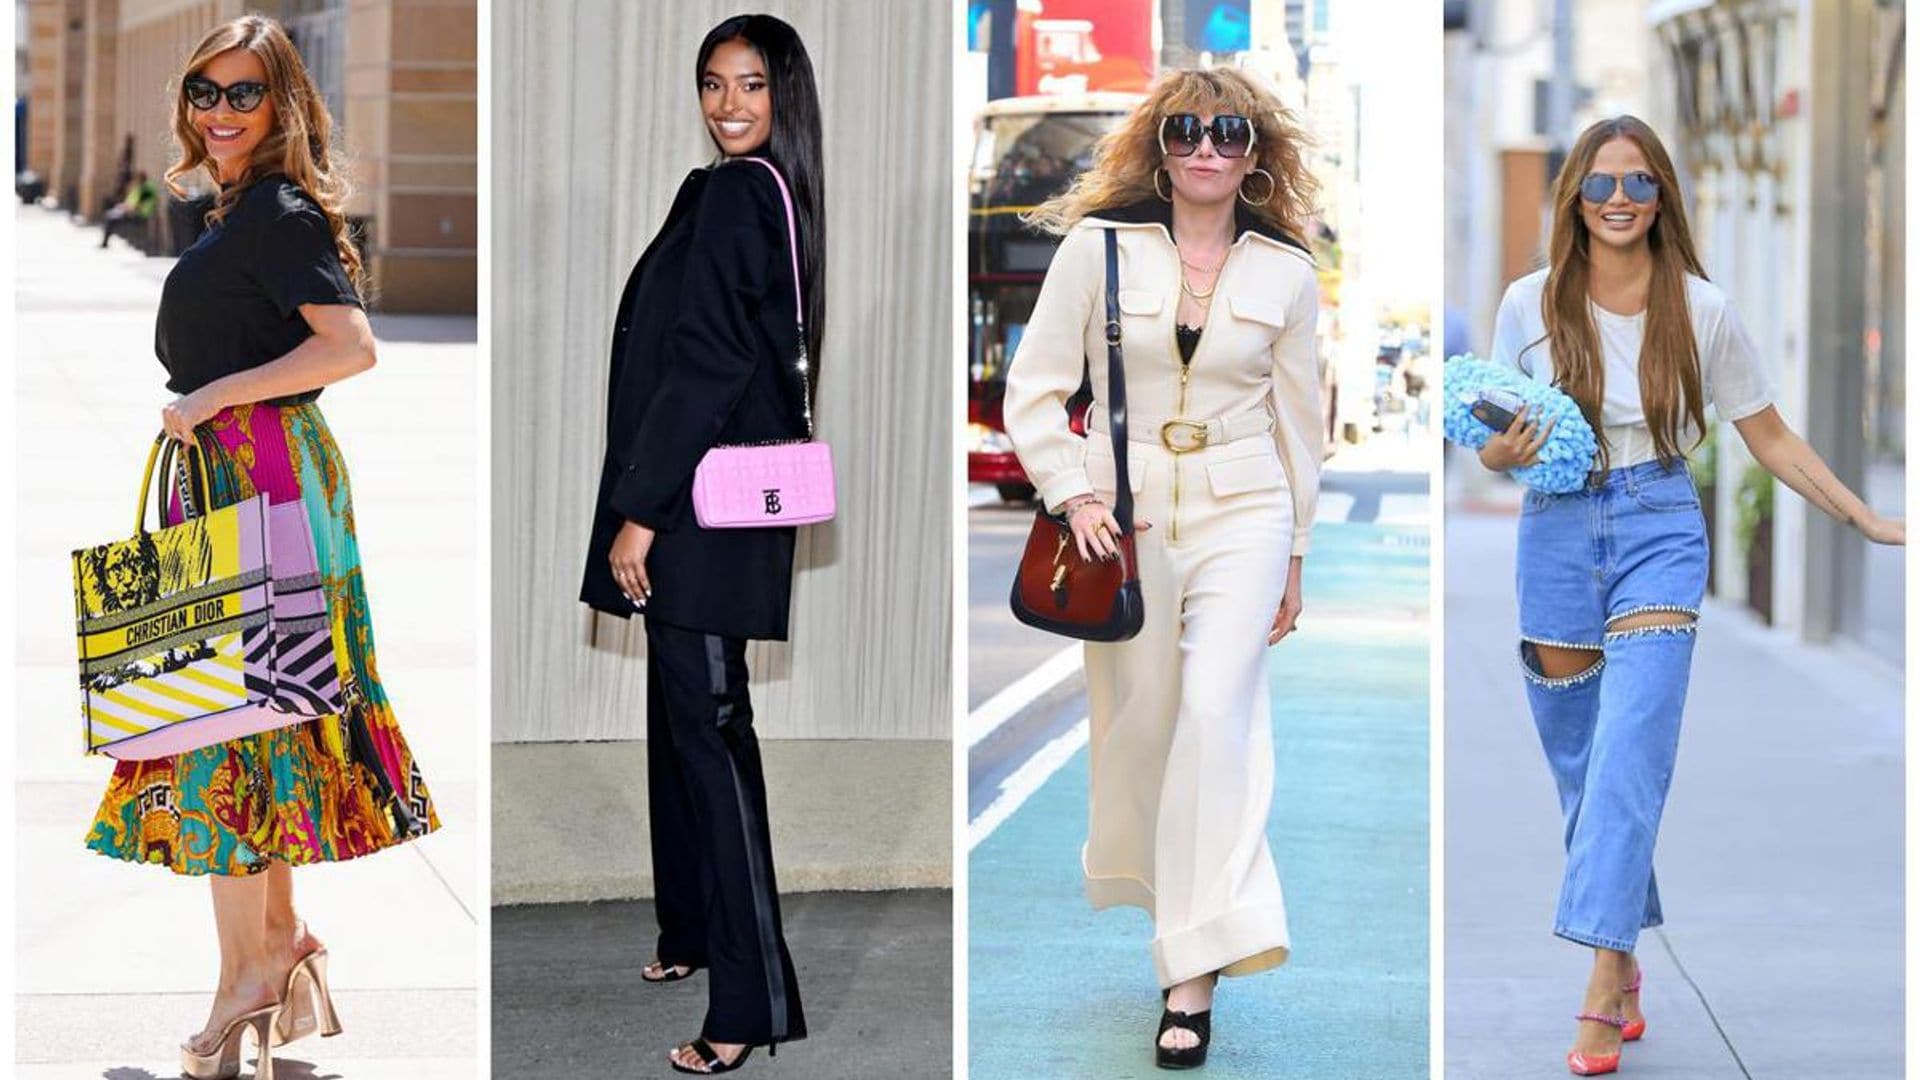 Top Celeb Styles of the Week - April 22nd